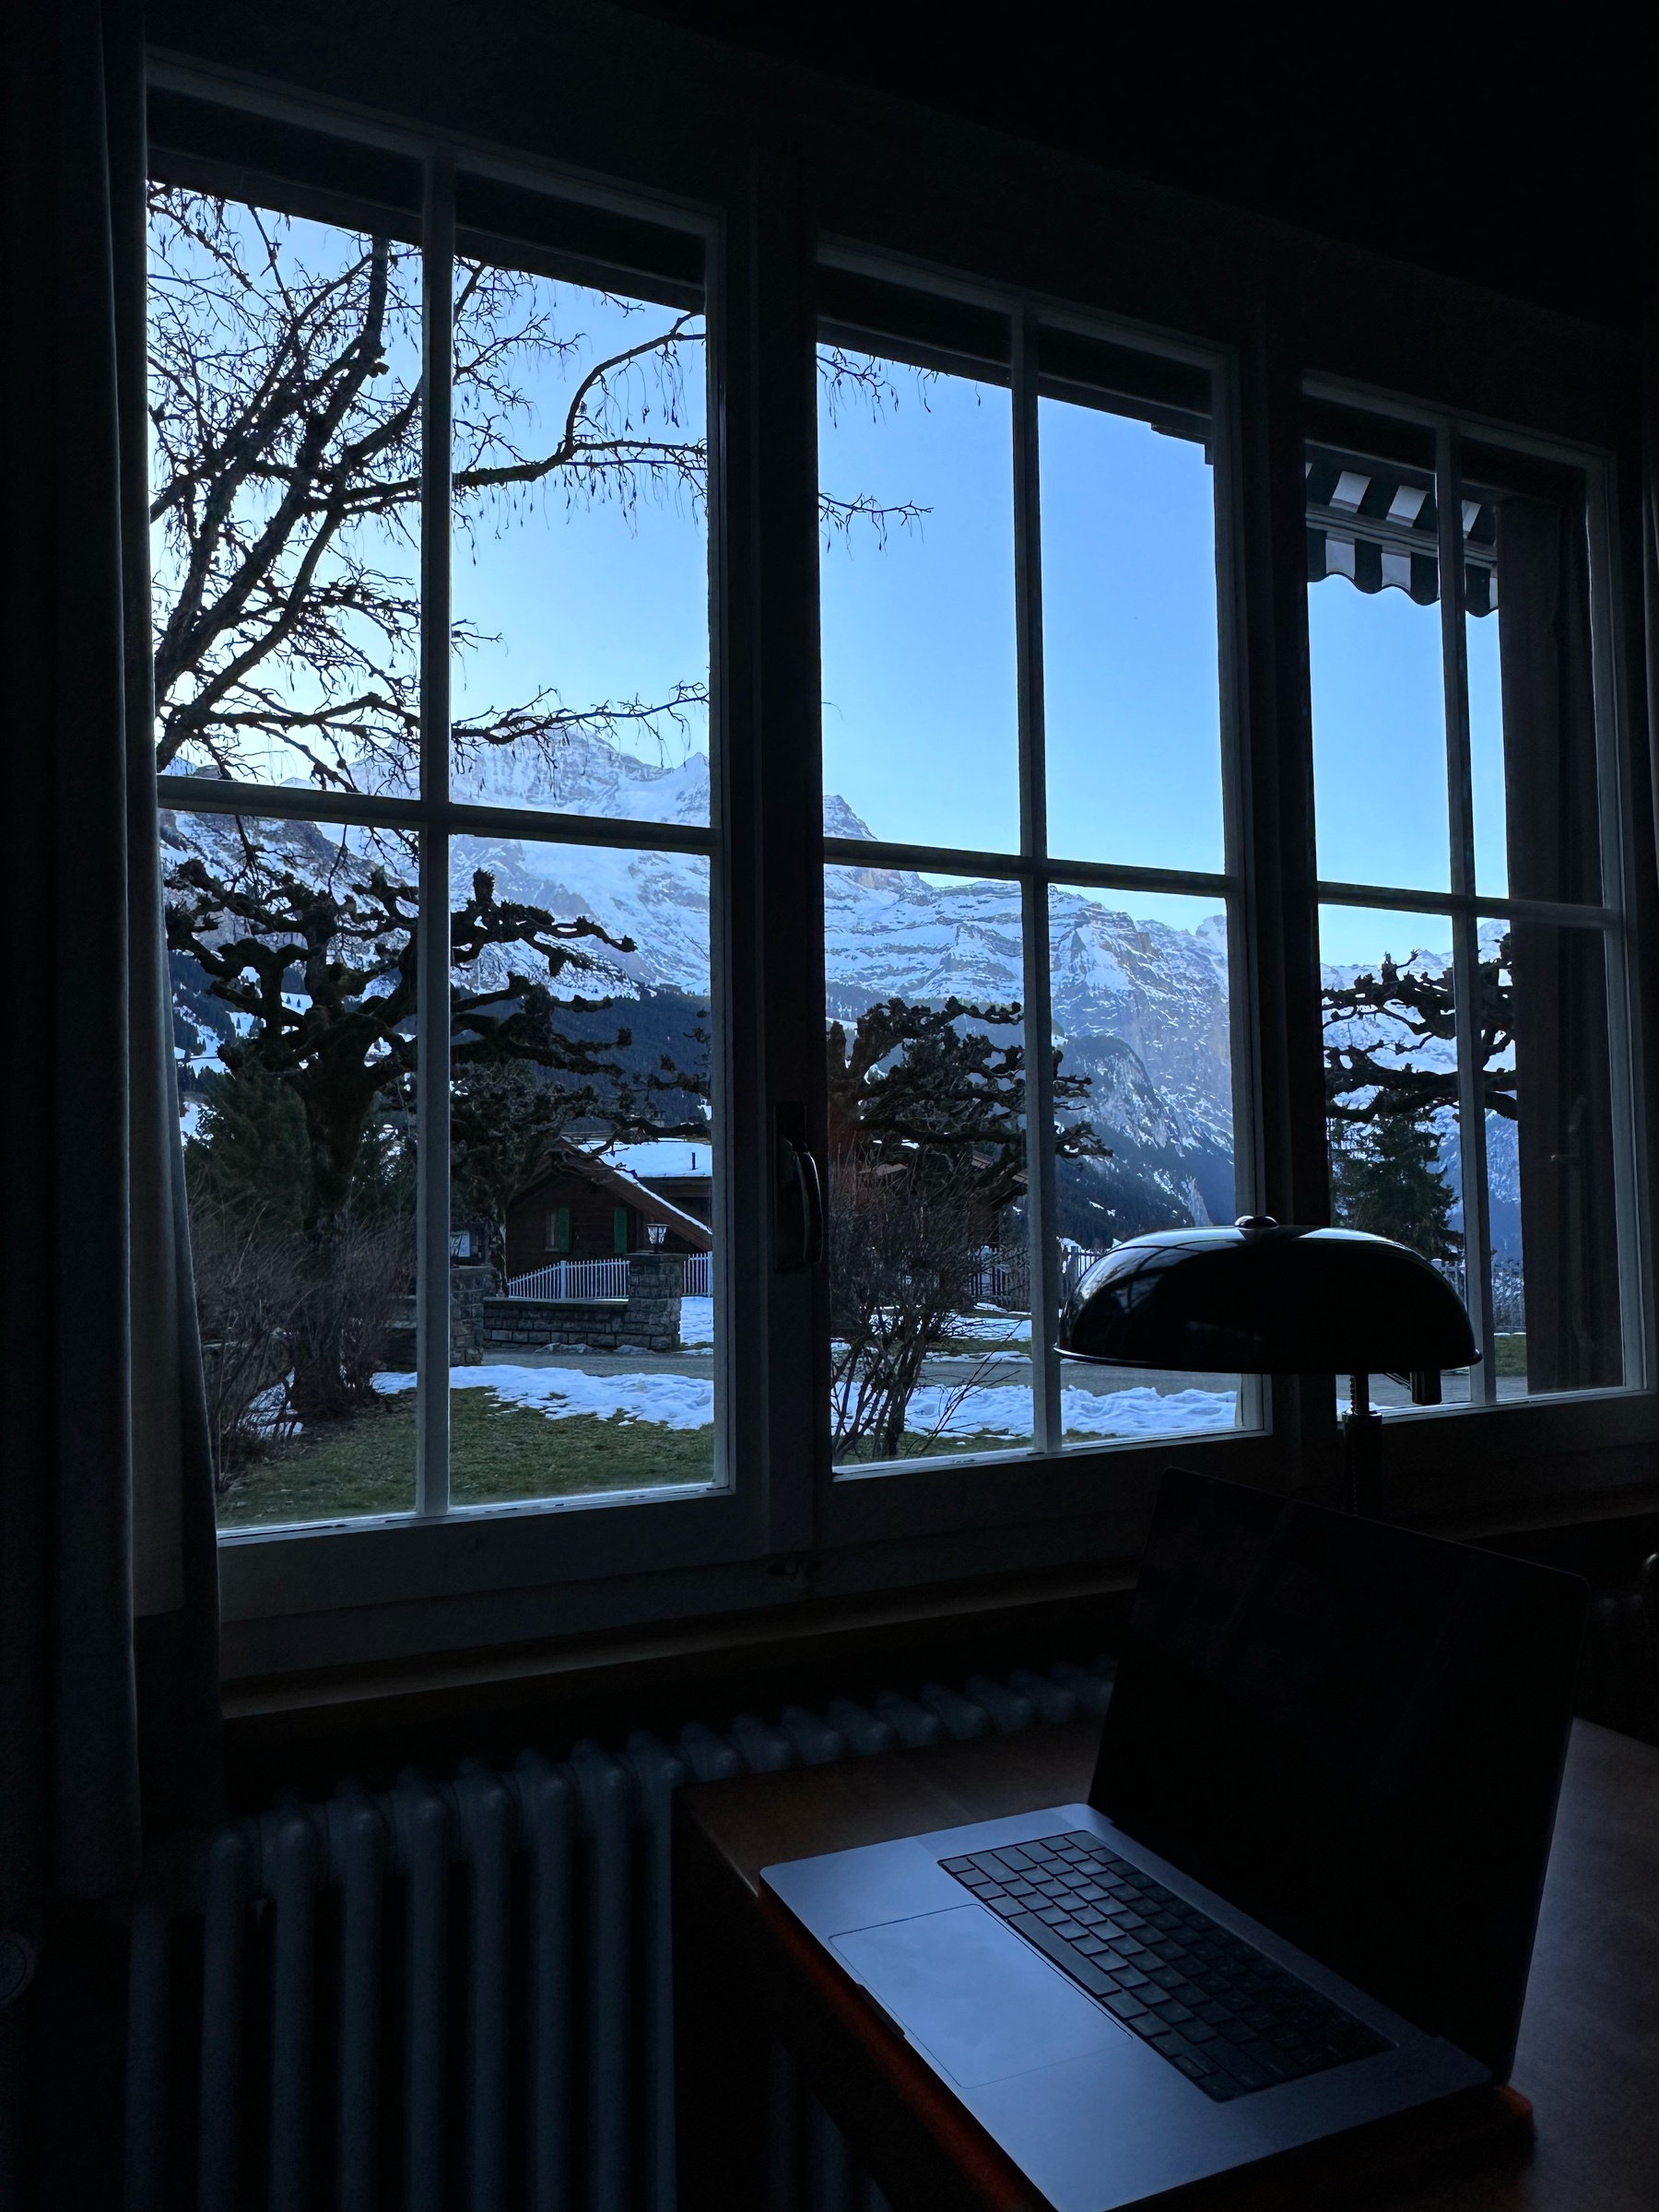 Laptop on a small table in front of a window with a view of snow-covered mountains in the Swiss Alps.